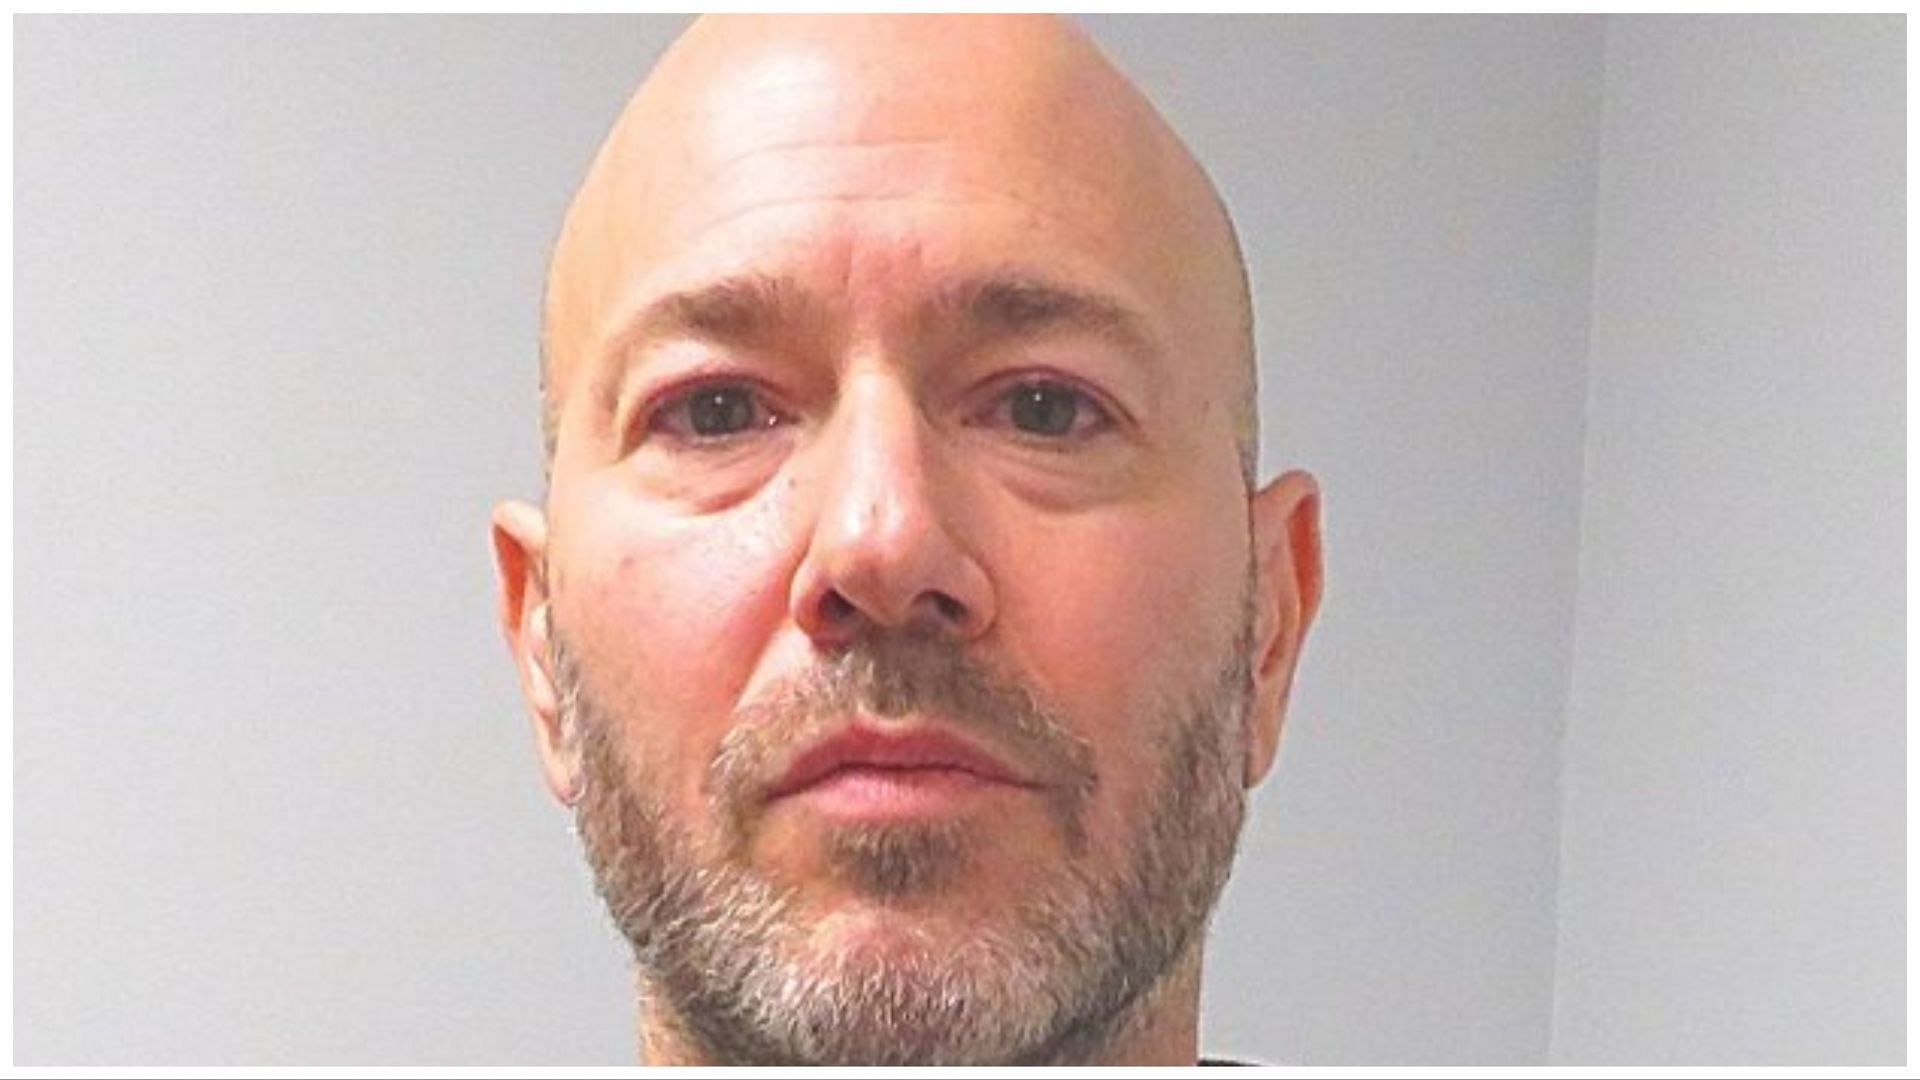 Paul Belloisi has been convicted for attempting to smuggle cocaine in 2020, (Image via United States Attorney for the Eastern District of New York)